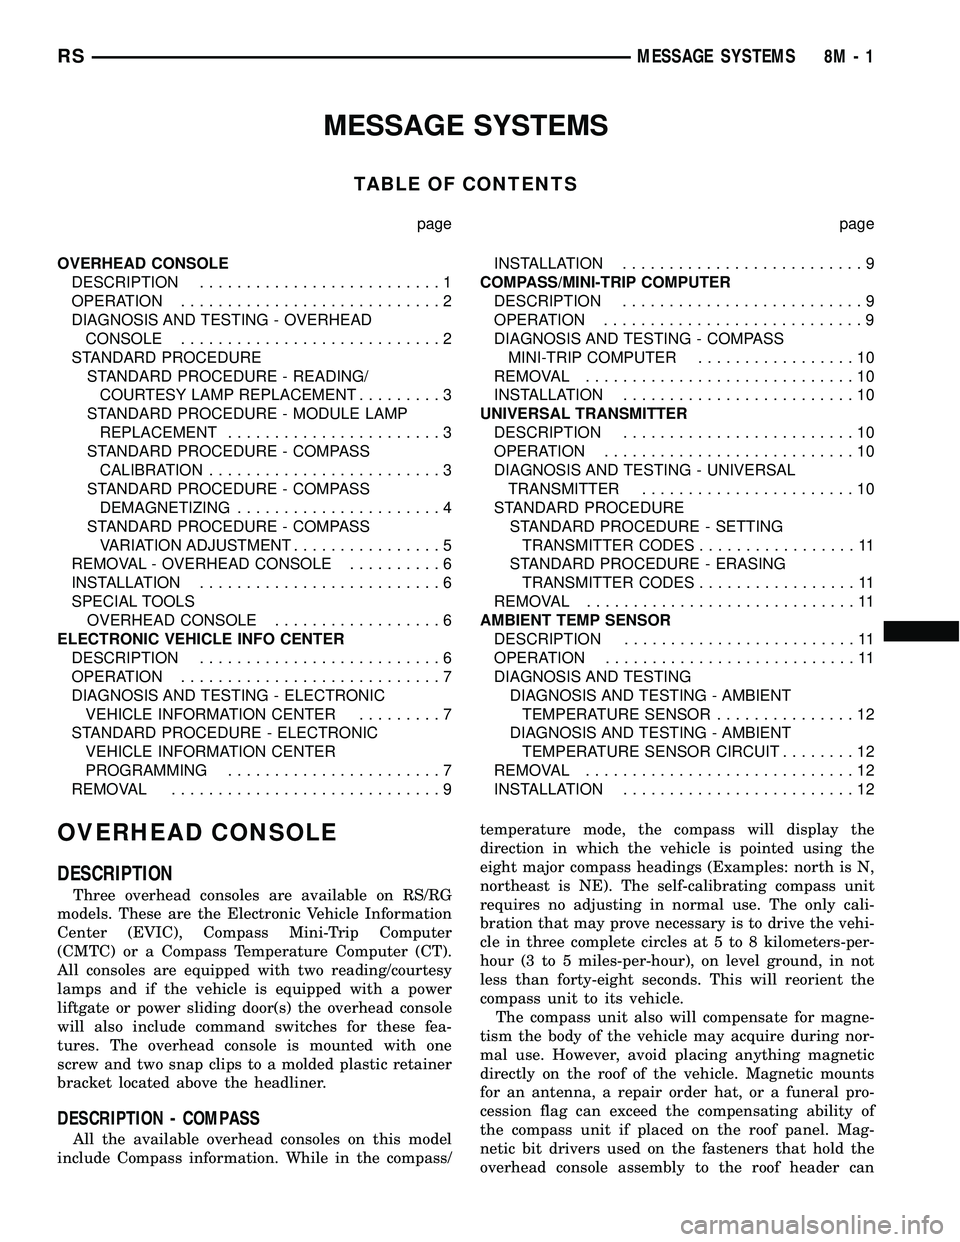 DODGE TOWN AND COUNTRY 2004  Service Manual MESSAGE SYSTEMS
TABLE OF CONTENTS
page page
OVERHEAD CONSOLE
DESCRIPTION..........................1
OPERATION............................2
DIAGNOSIS AND TESTING - OVERHEAD
CONSOLE.....................